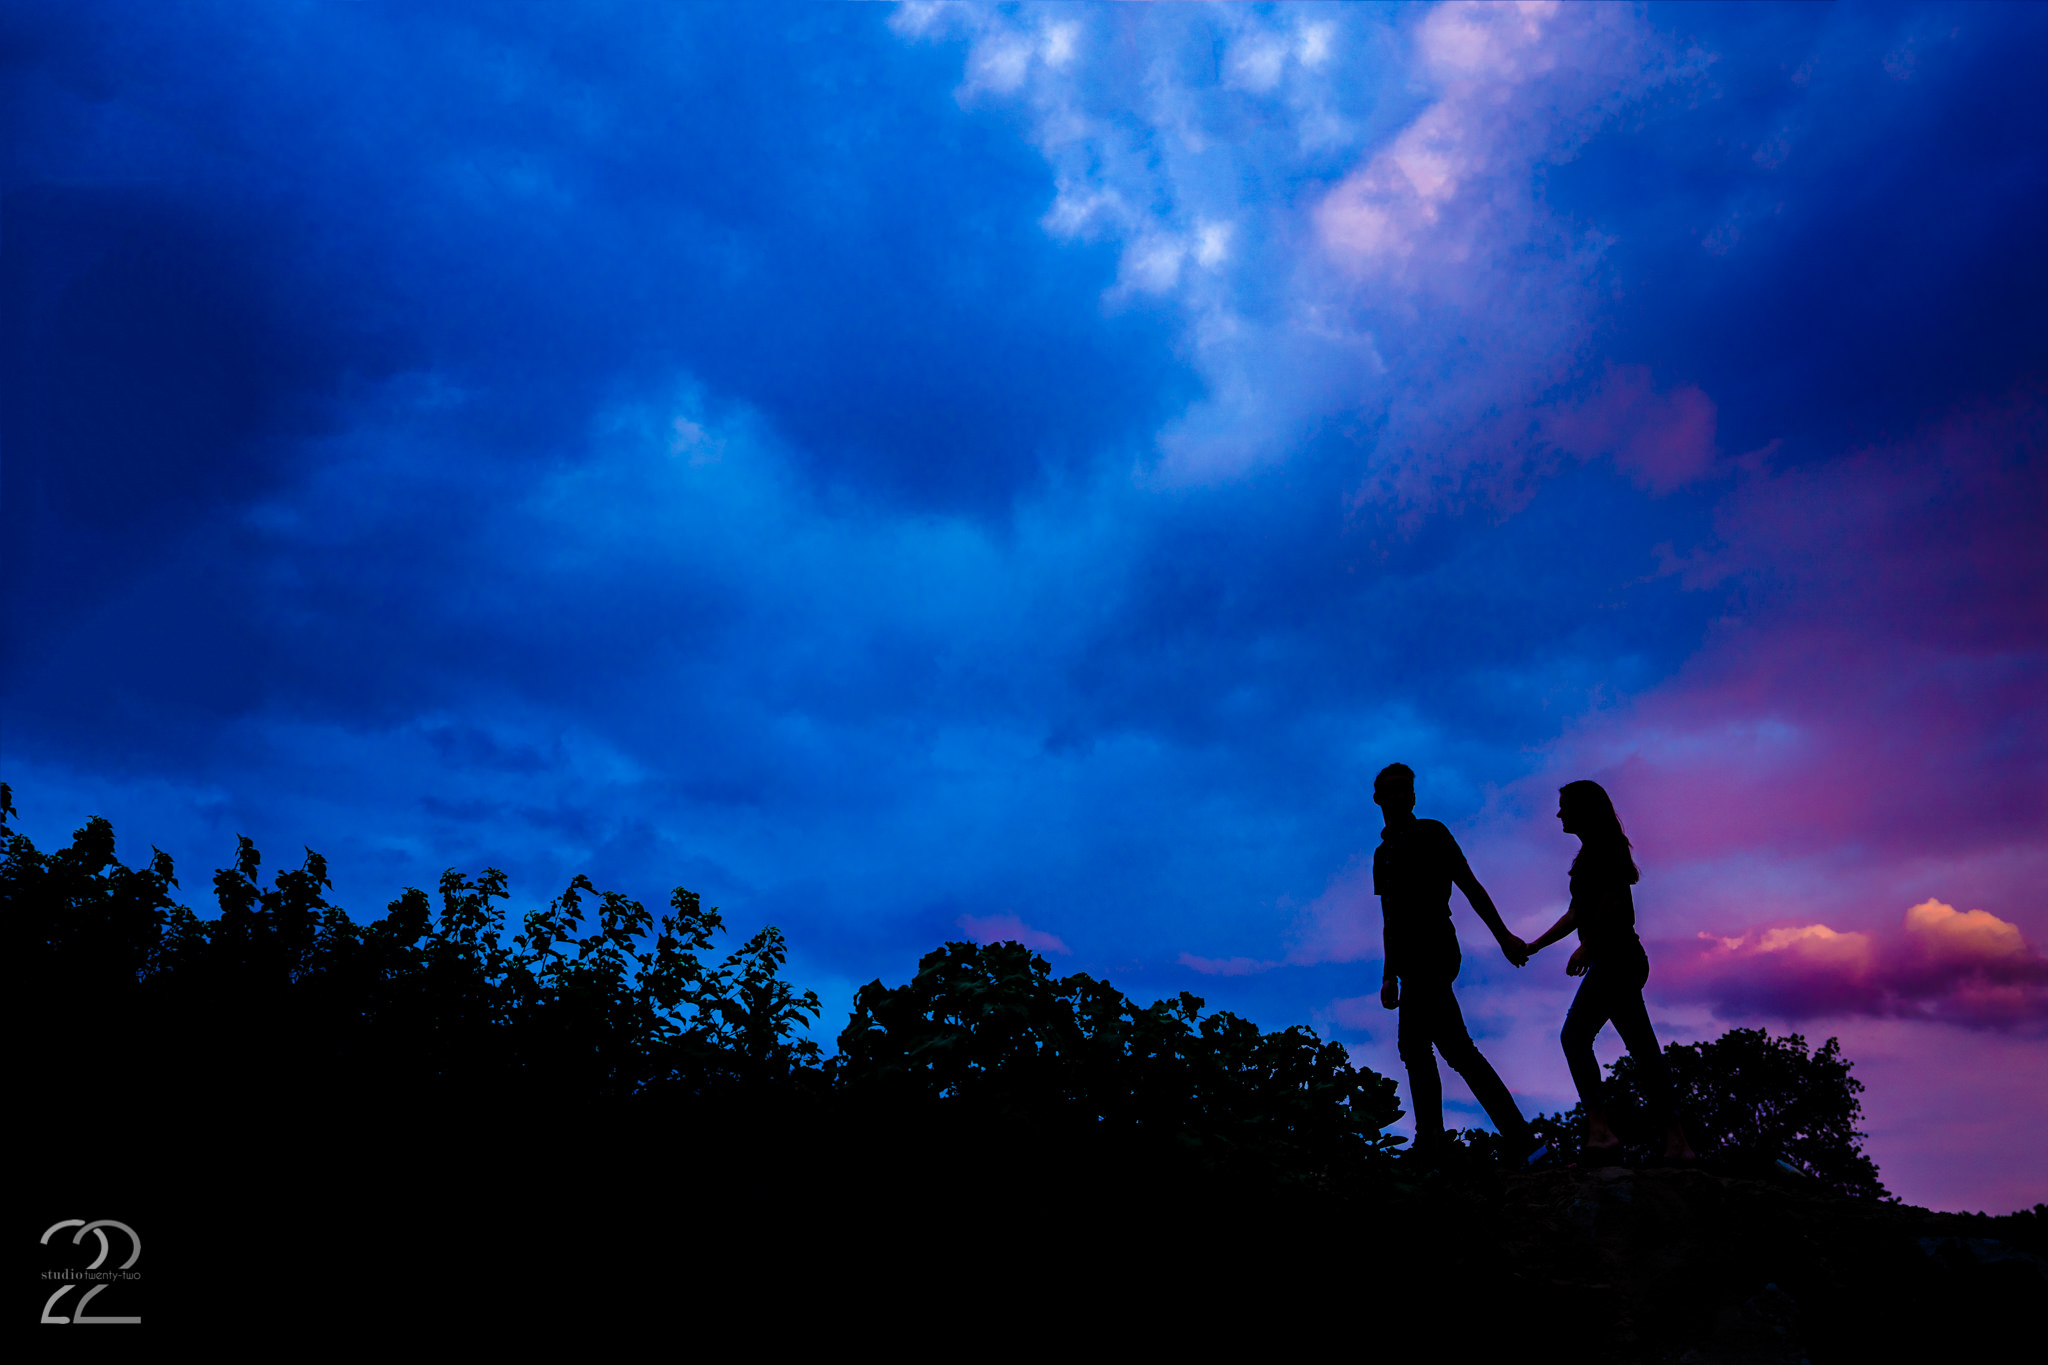  Creating an image that illicit and emotion is Studio 22’s ultimate goal. We were lucky enough for this gorgeous sky to appear at Northwestern University during Tim and Michelle’s engagement photos. 